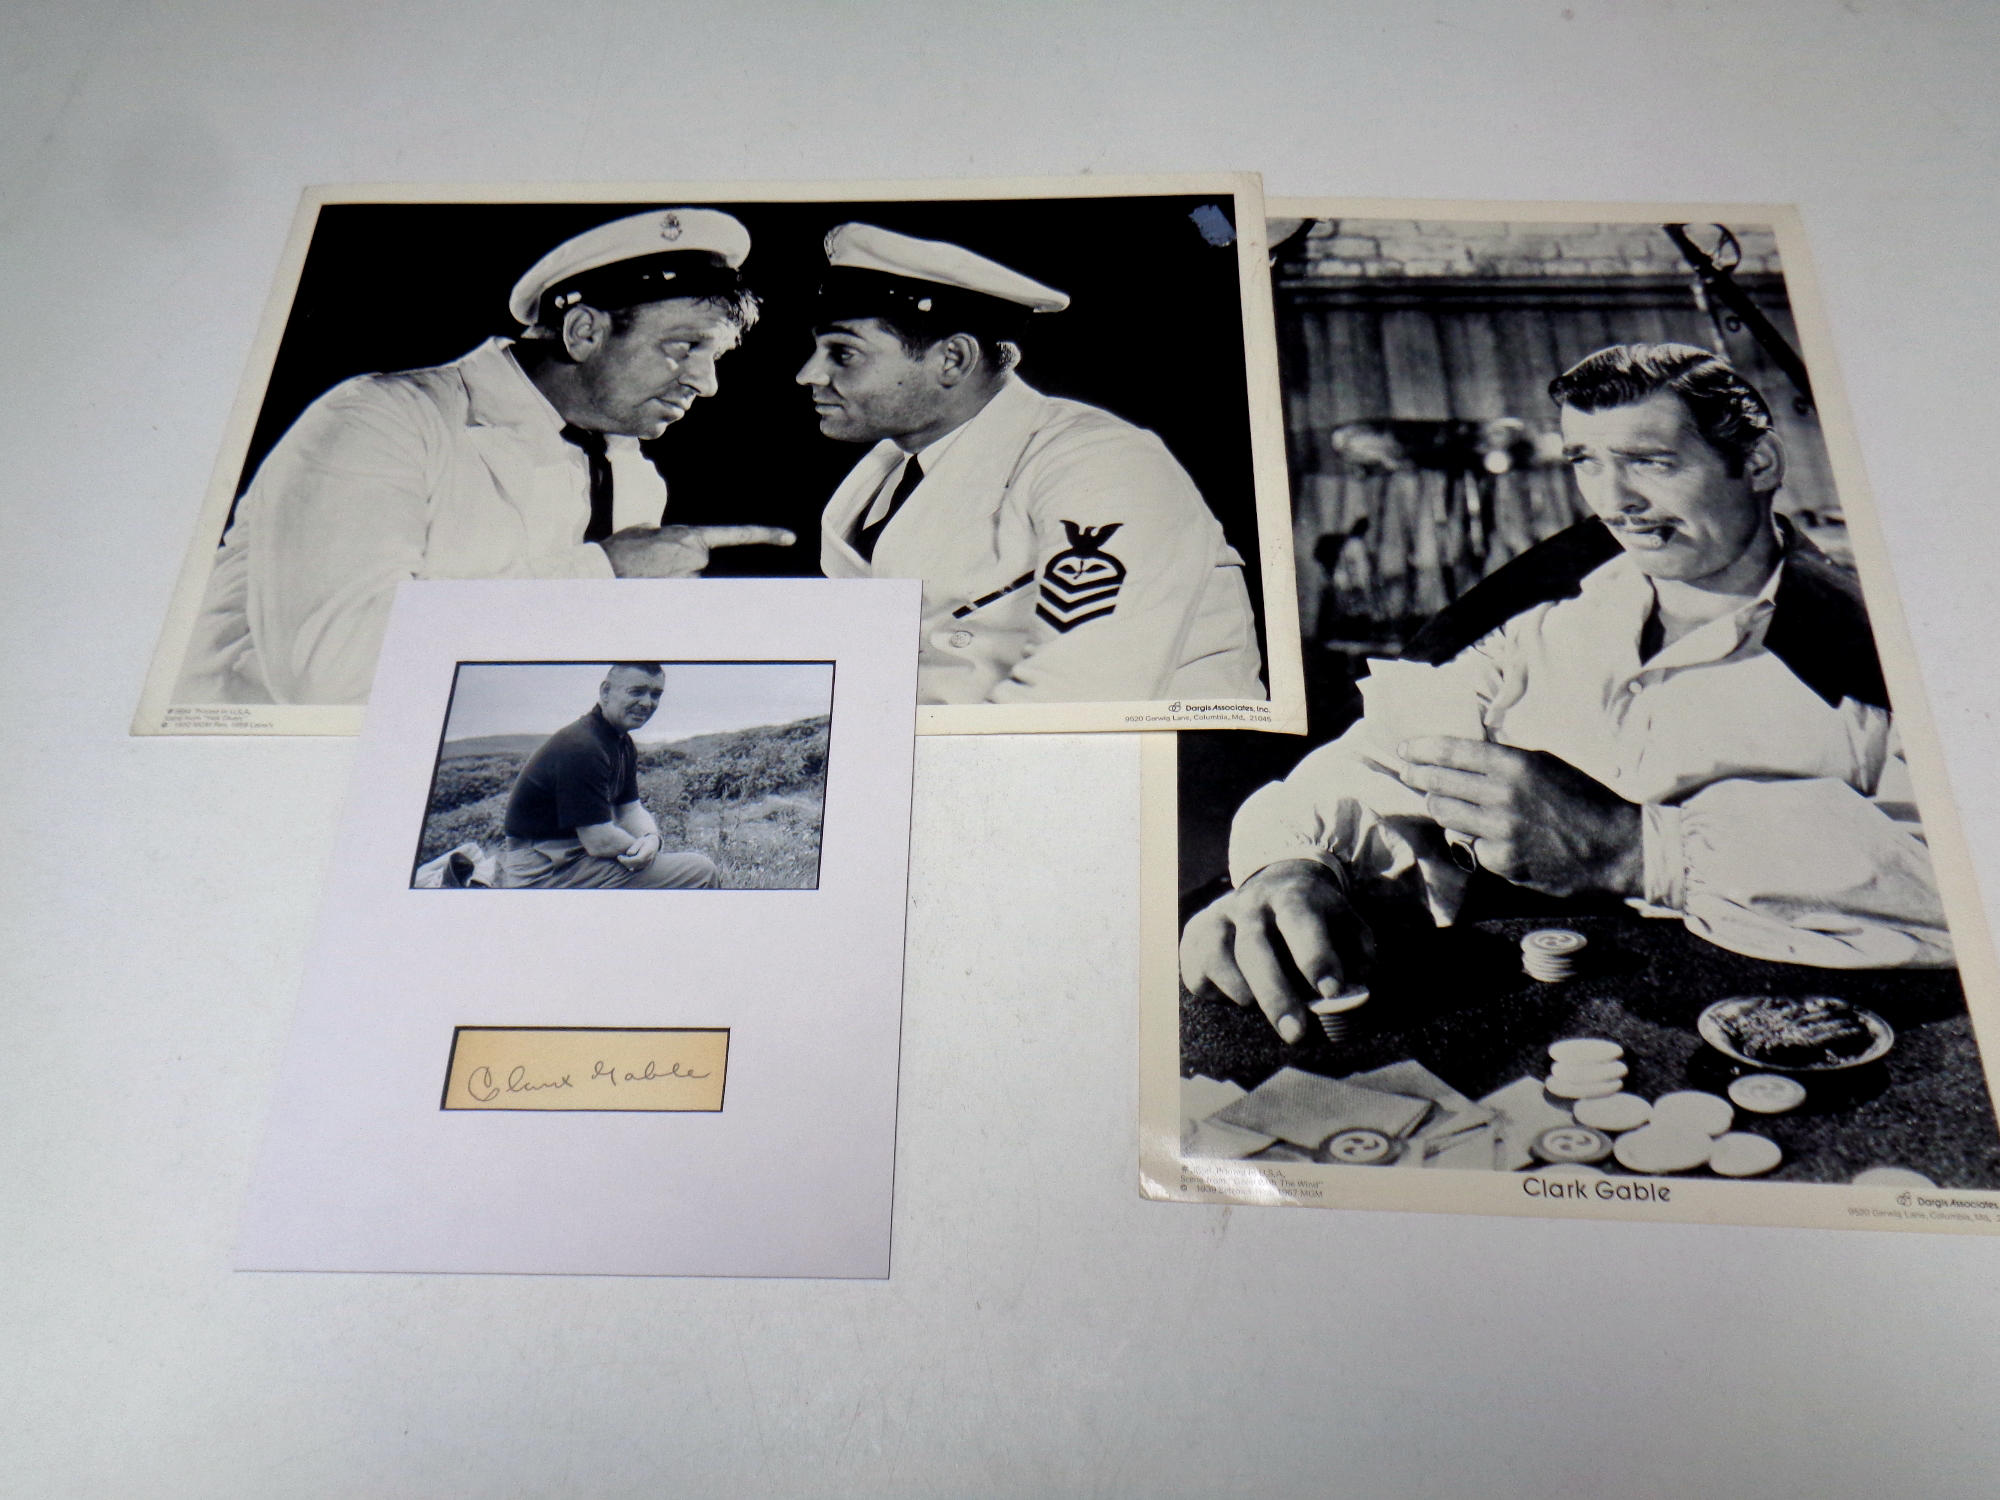 A Clark Gable autograph with two vintage cinema cards of Clark Gable in Gone with the Wind,